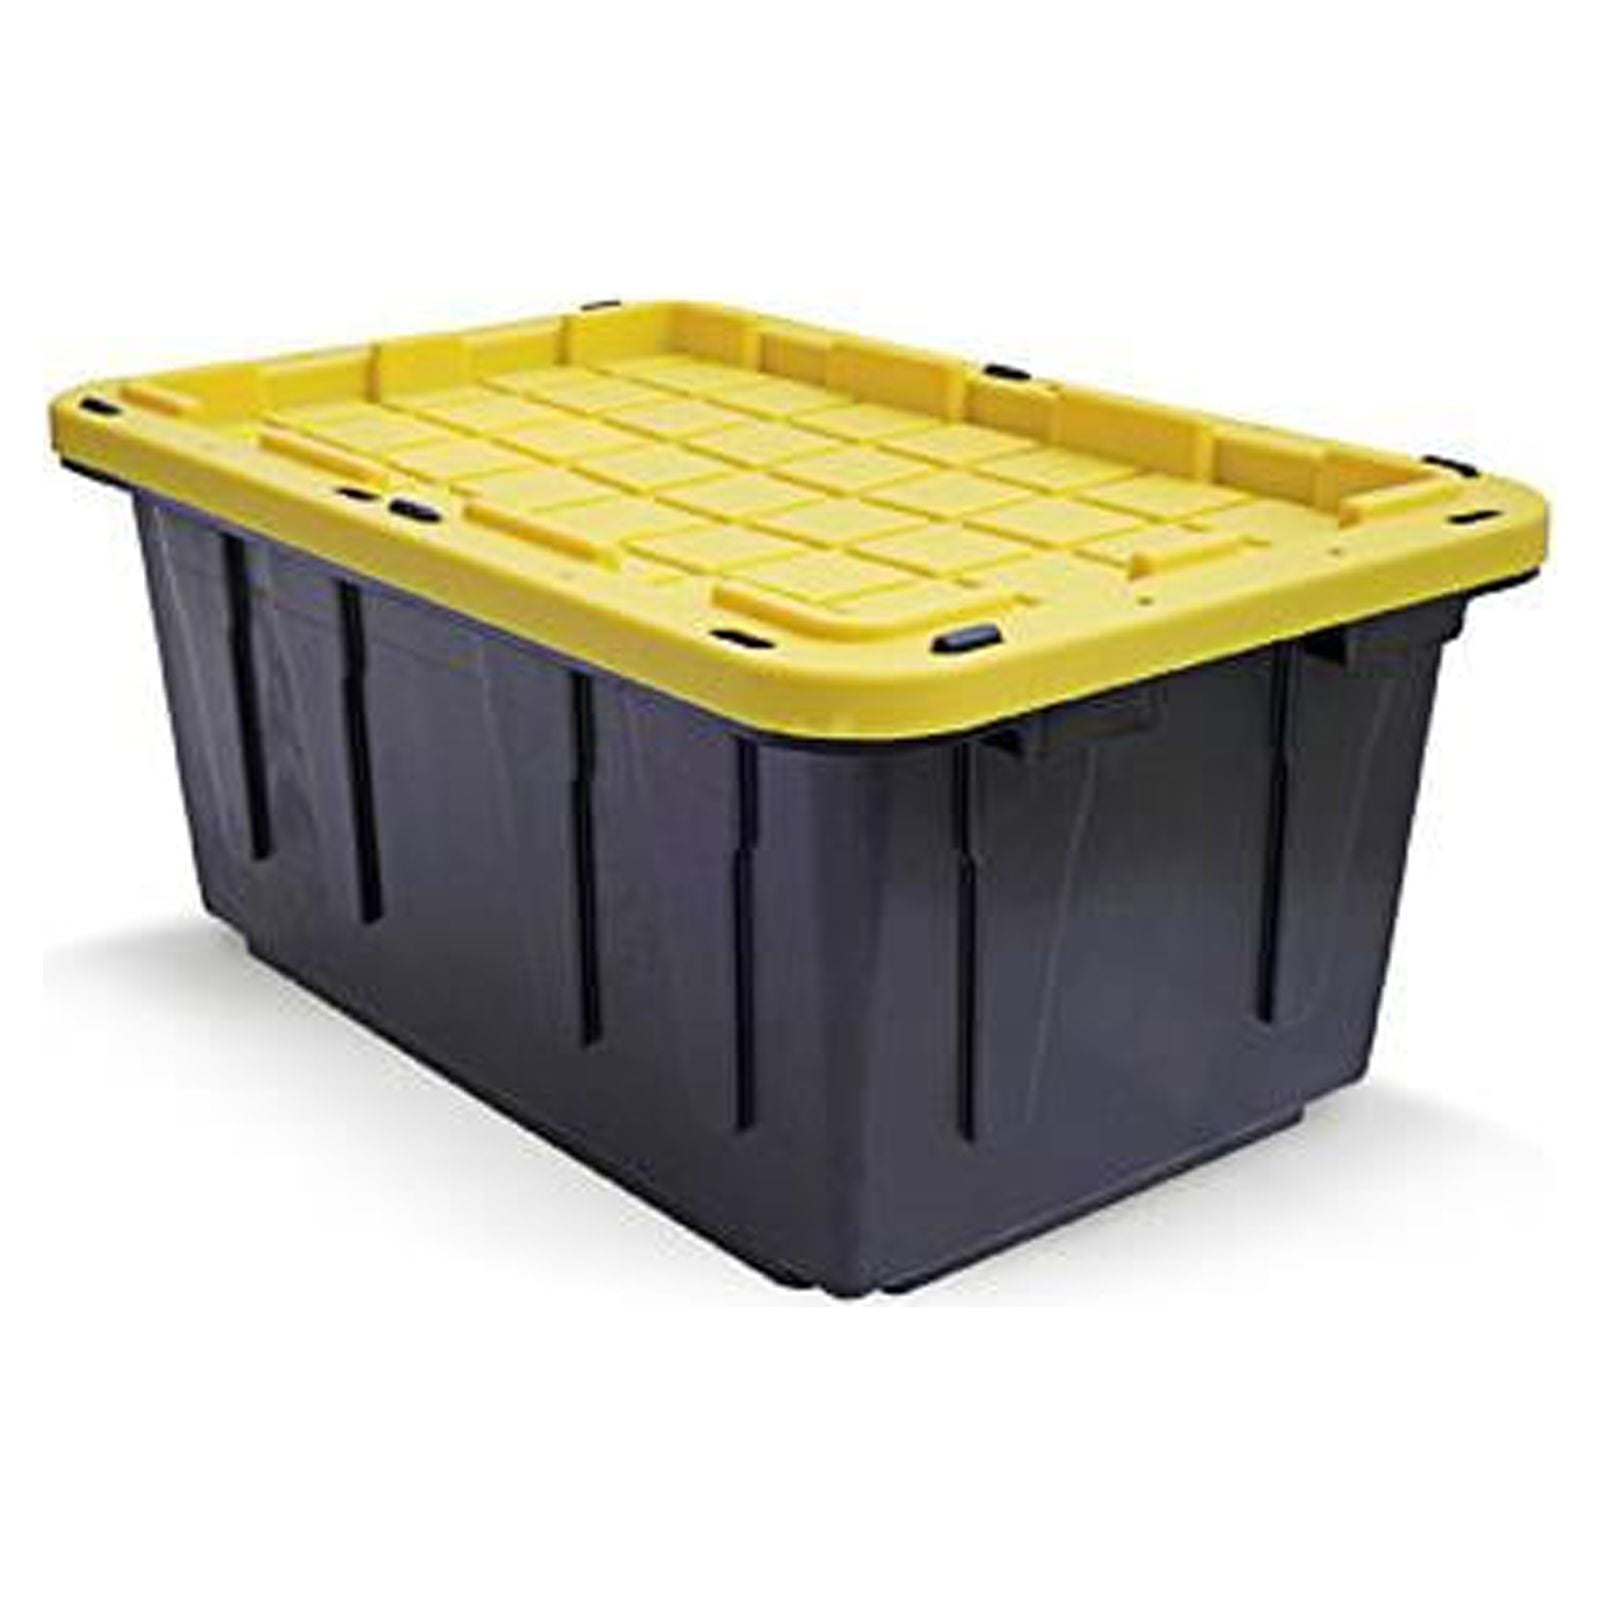 17 Gallon Tote - Made in the USA by Doyle Shamrock Industries